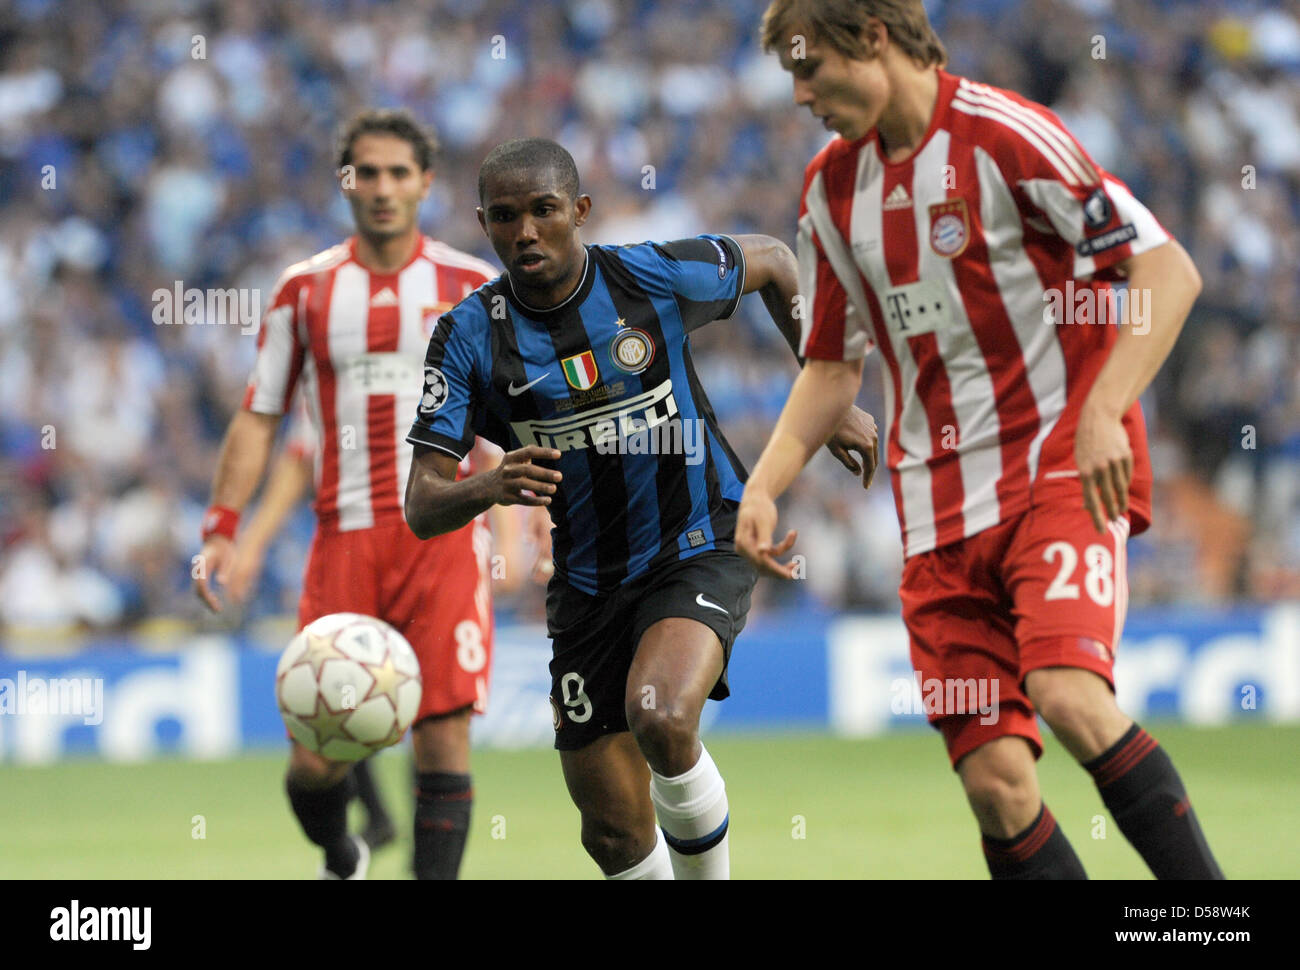 Bayern's Hamit Altintop (L) and Holger Badstuber (R) fight for the ball with Inter's Samuel Eto'o shown in action during the UEFA Champions League final FC Bayern Munich vs FC Internazionale Milano at Santiago Bernabeu stadium in Madrid, Spain, 22 May 2010. Inter defeated Bayern Munich 2-0 and won the 2010 Champions League. Photo: Andreas Gebert Stock Photo